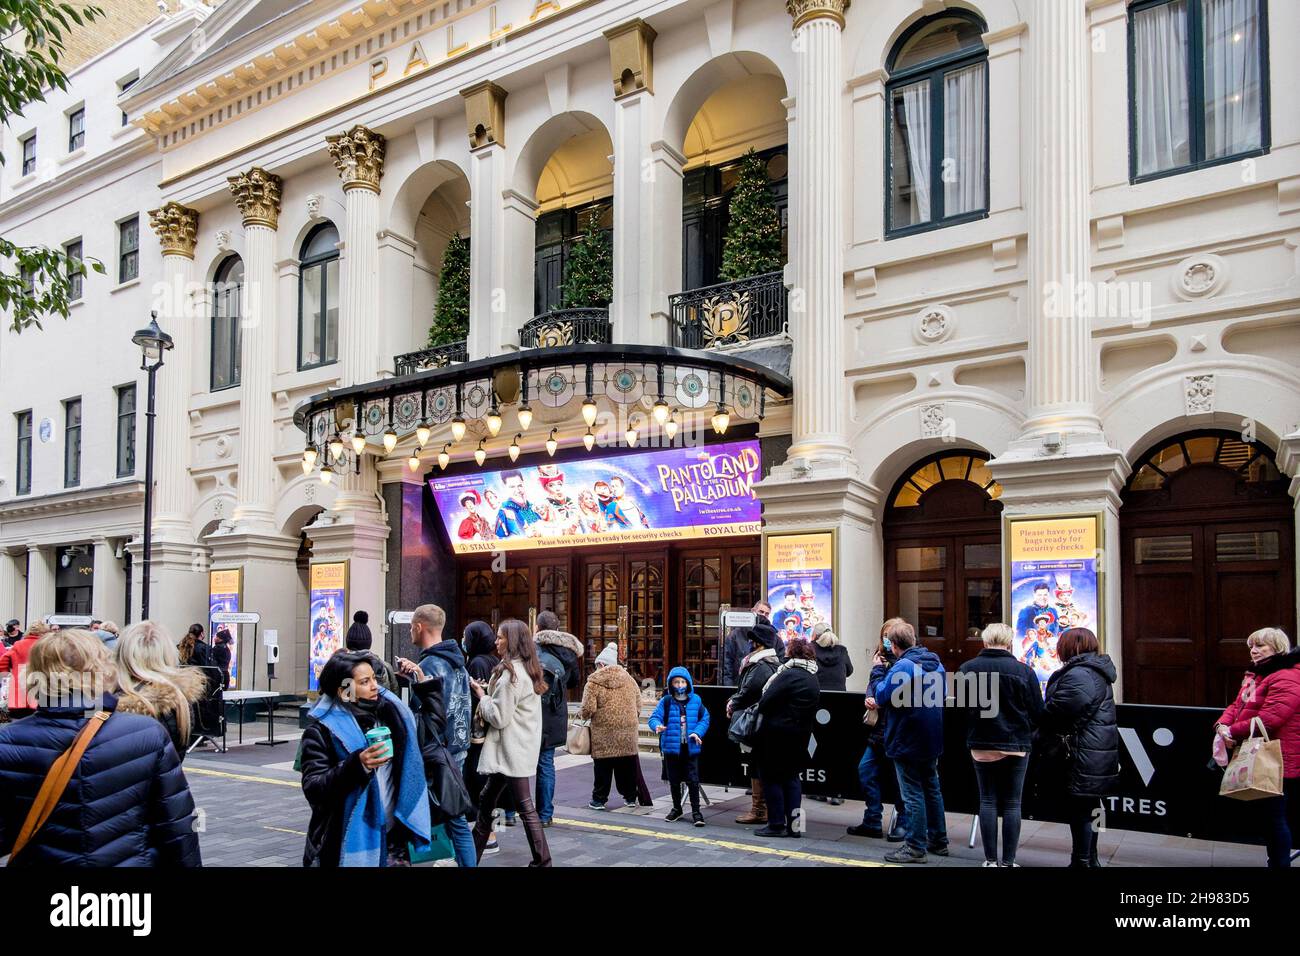 4th December 2021: Pantoland at the London Palladium opens for traditional Christmas performances after last year's production was cancelled due to the coronavirus pandemic. The family show which stars Donny Osmond and Julian Clary runs until 9th January. London, UK. Stock Photo